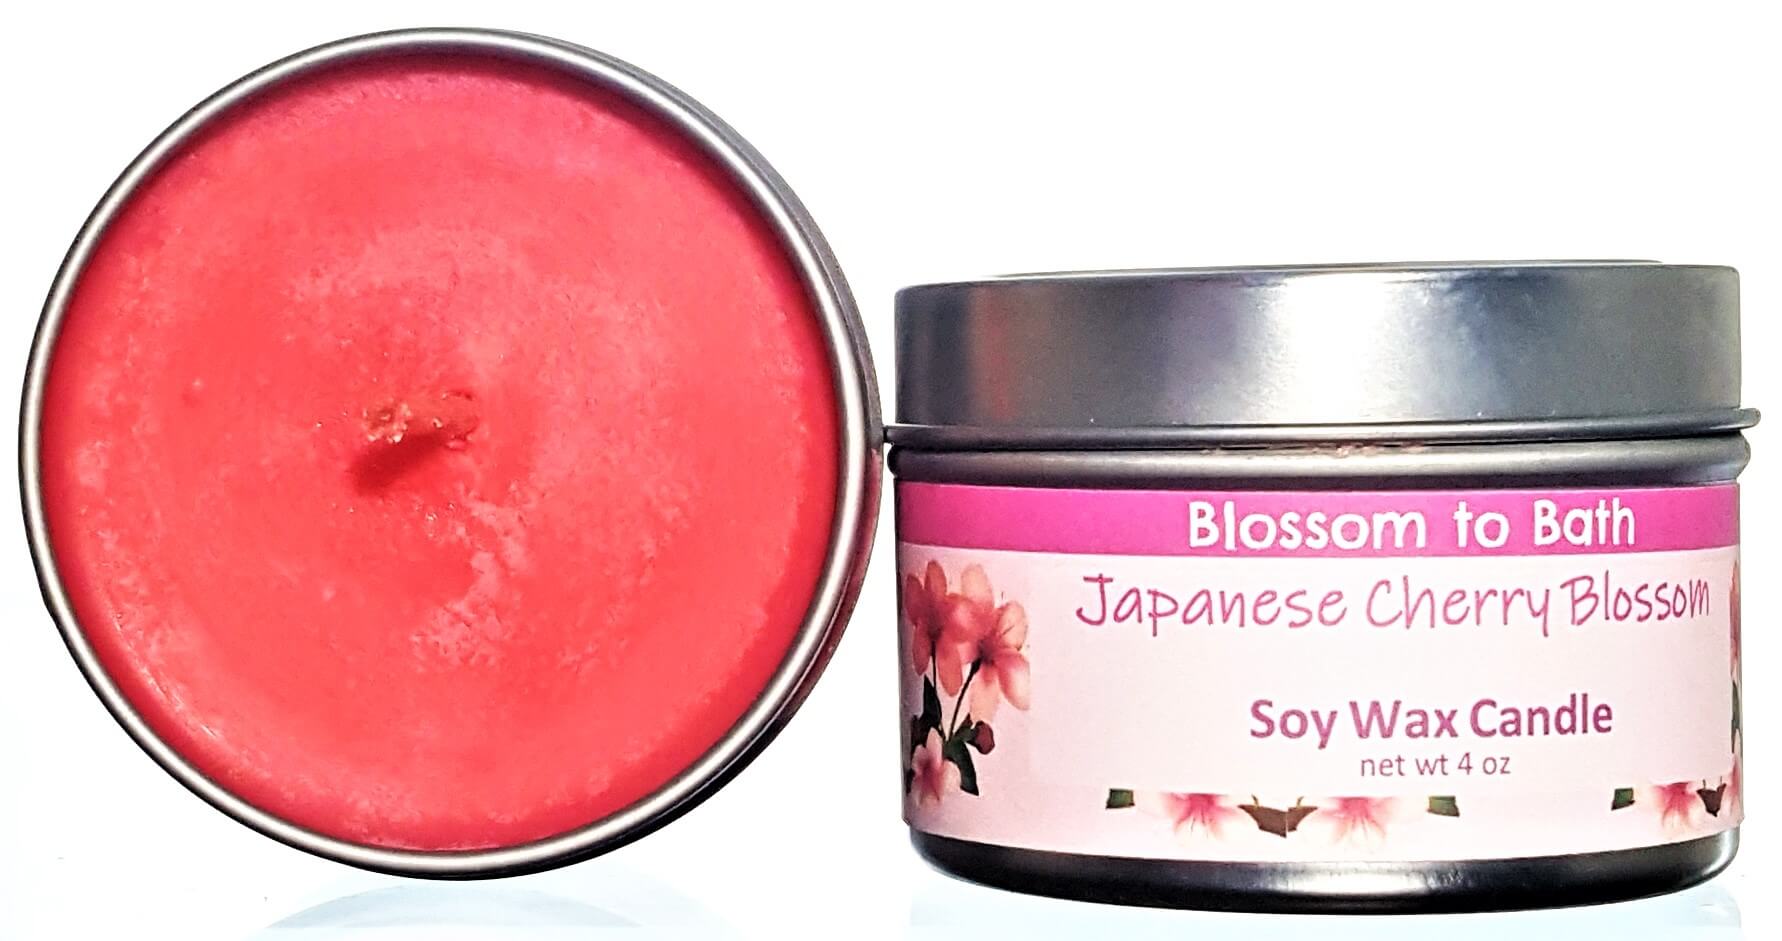 Buy Blossom to Bath Japanese Cherry Blossom Soy Wax Candle from Flowersong Soap Studio.  Fill the air with a charming fragrance that lasts for hours  A sophisticated and rich cherry blossom fragrance that is oriental and sensual.